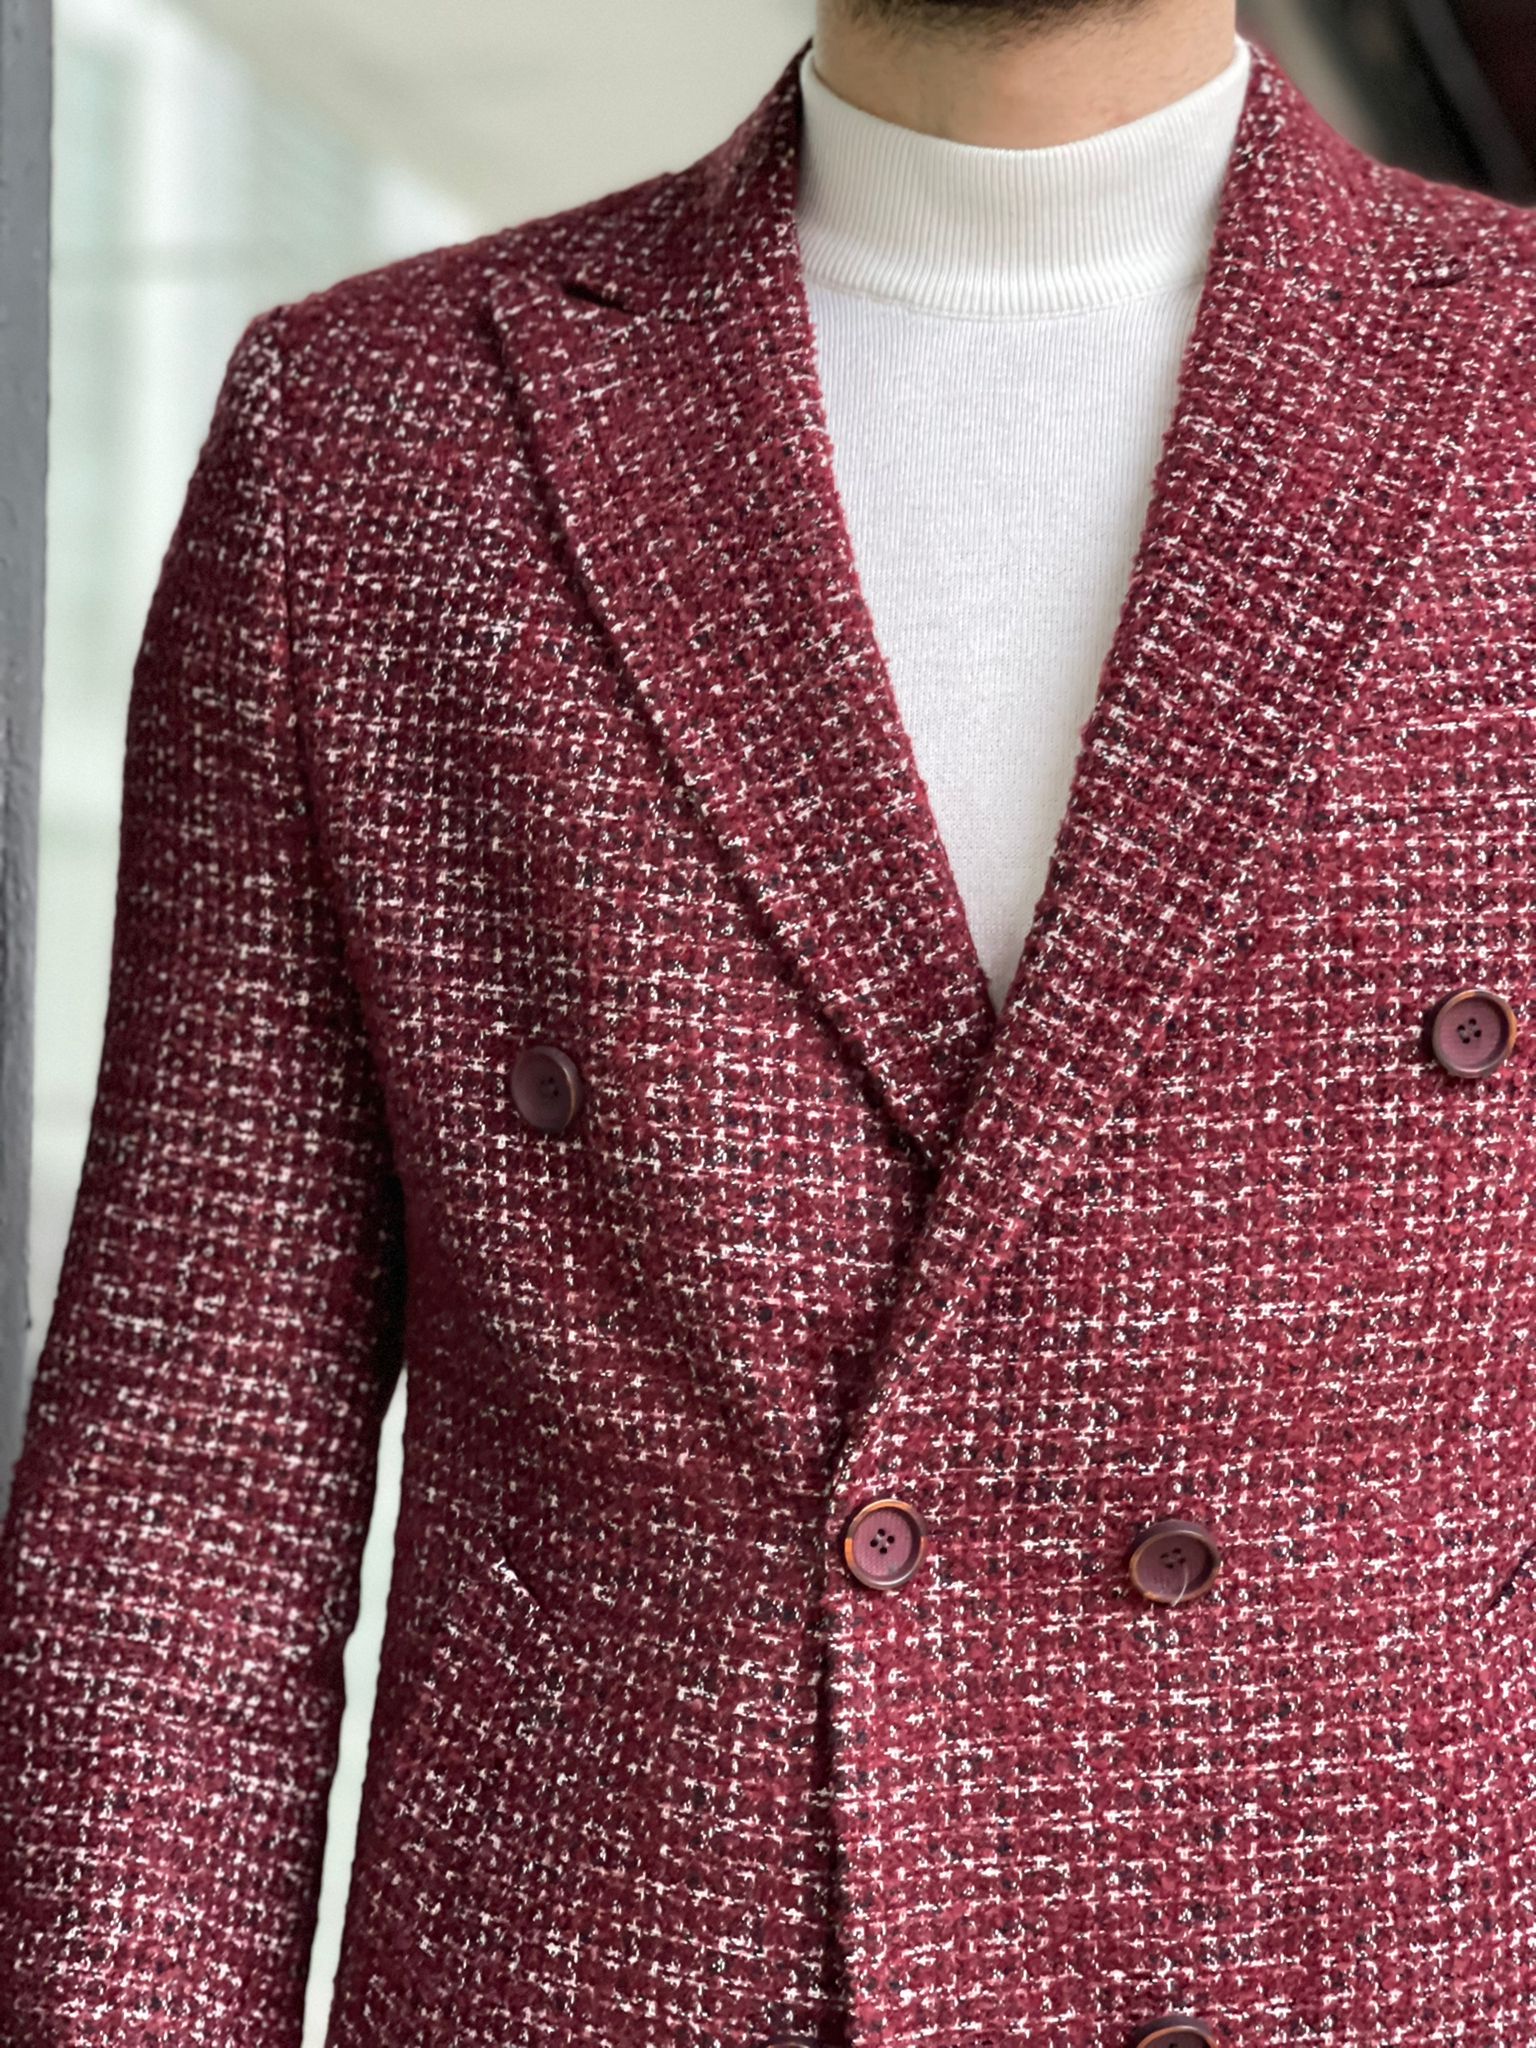 Men's Double Breasted Coat Blazer Slim Fit Red Double 